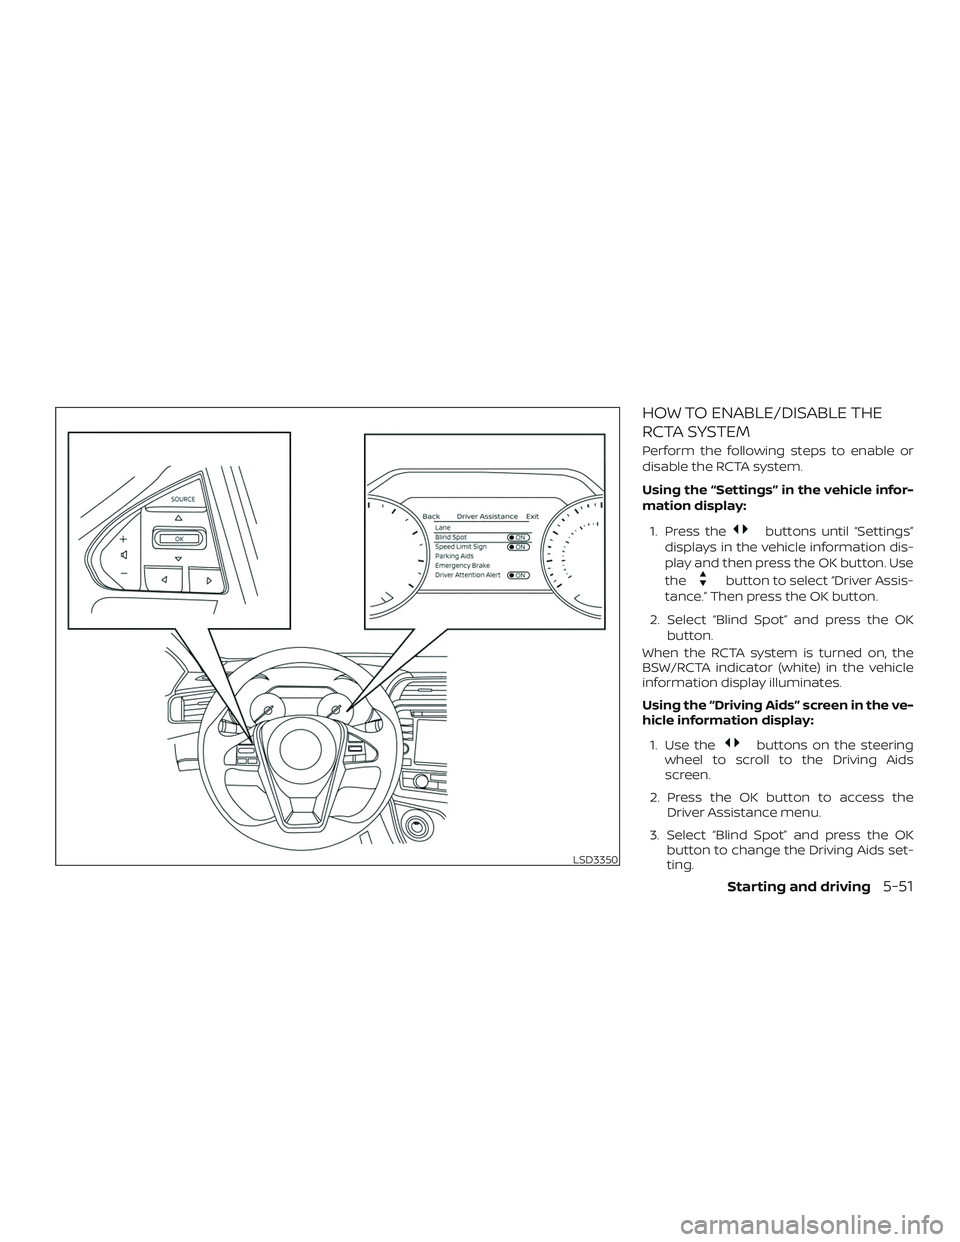 NISSAN MAXIMA 2020  Owner´s Manual HOW TO ENABLE/DISABLE THE
RCTA SYSTEM
Perform the following steps to enable or
disable the RCTA system.
Using the “Settings” in the vehicle infor-
mation display:1. Press the
buttons until “Sett